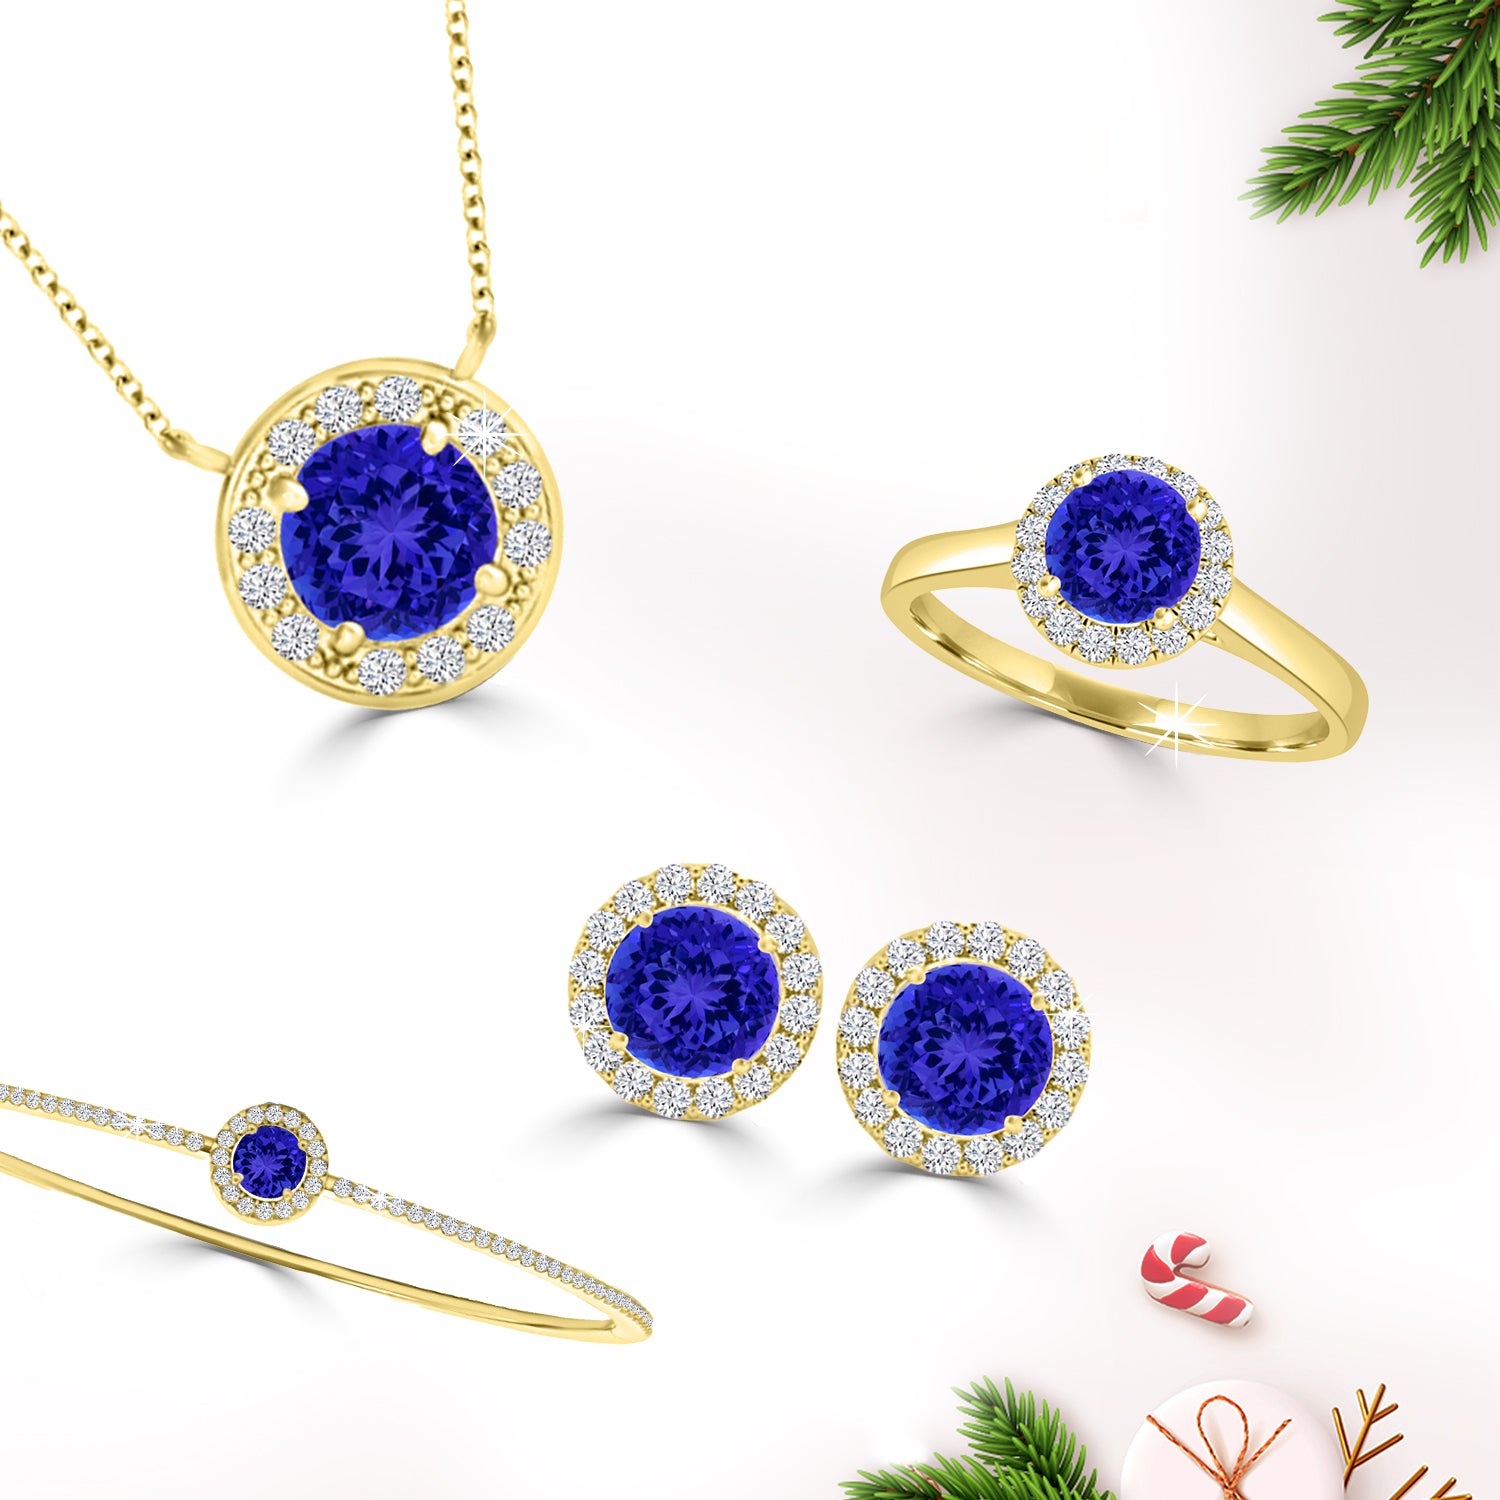 Make The Holidays Brighter With Our Tanzanite Jewelry On Sale